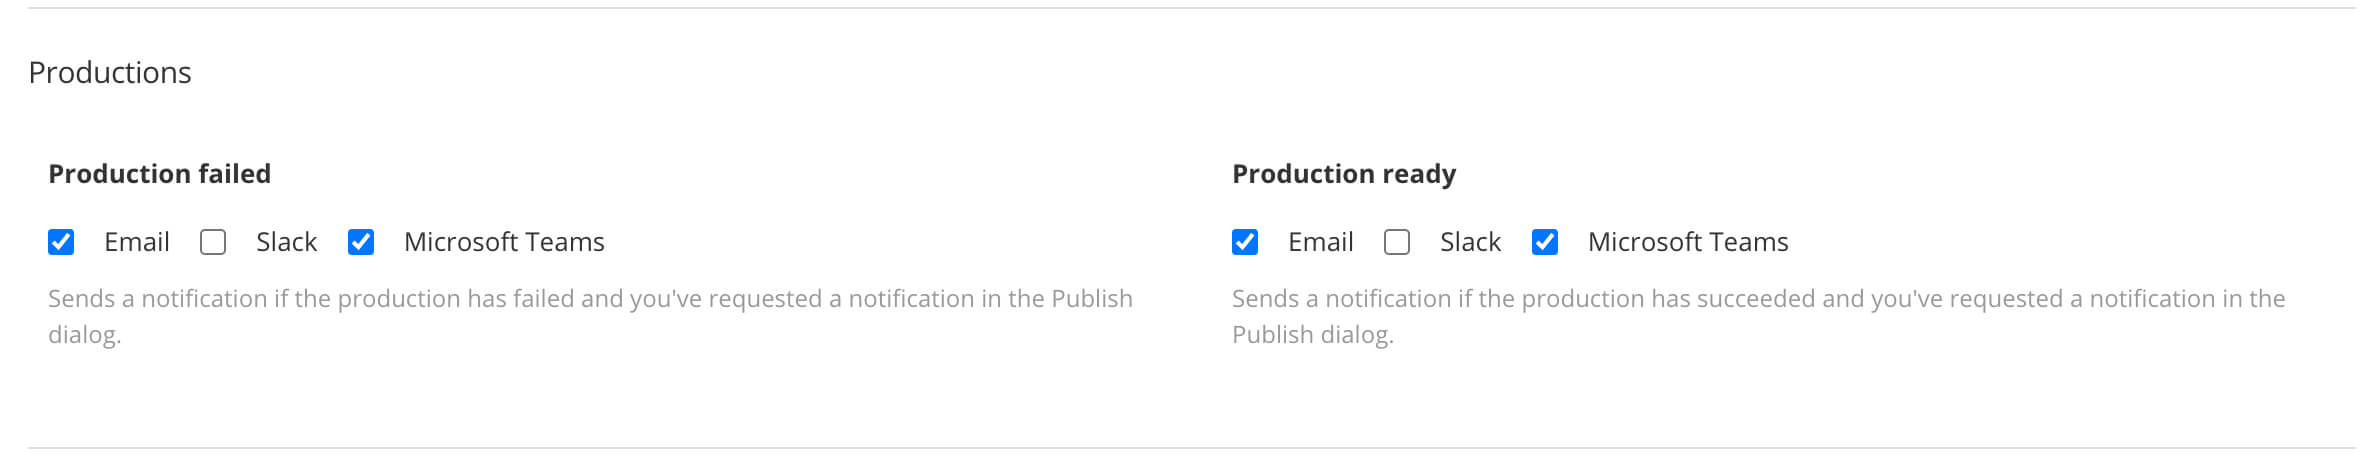 Productions settings on the Notifications tab of the My Profile dialog. There are settings for choosing whether you are notified about productions and production failures.